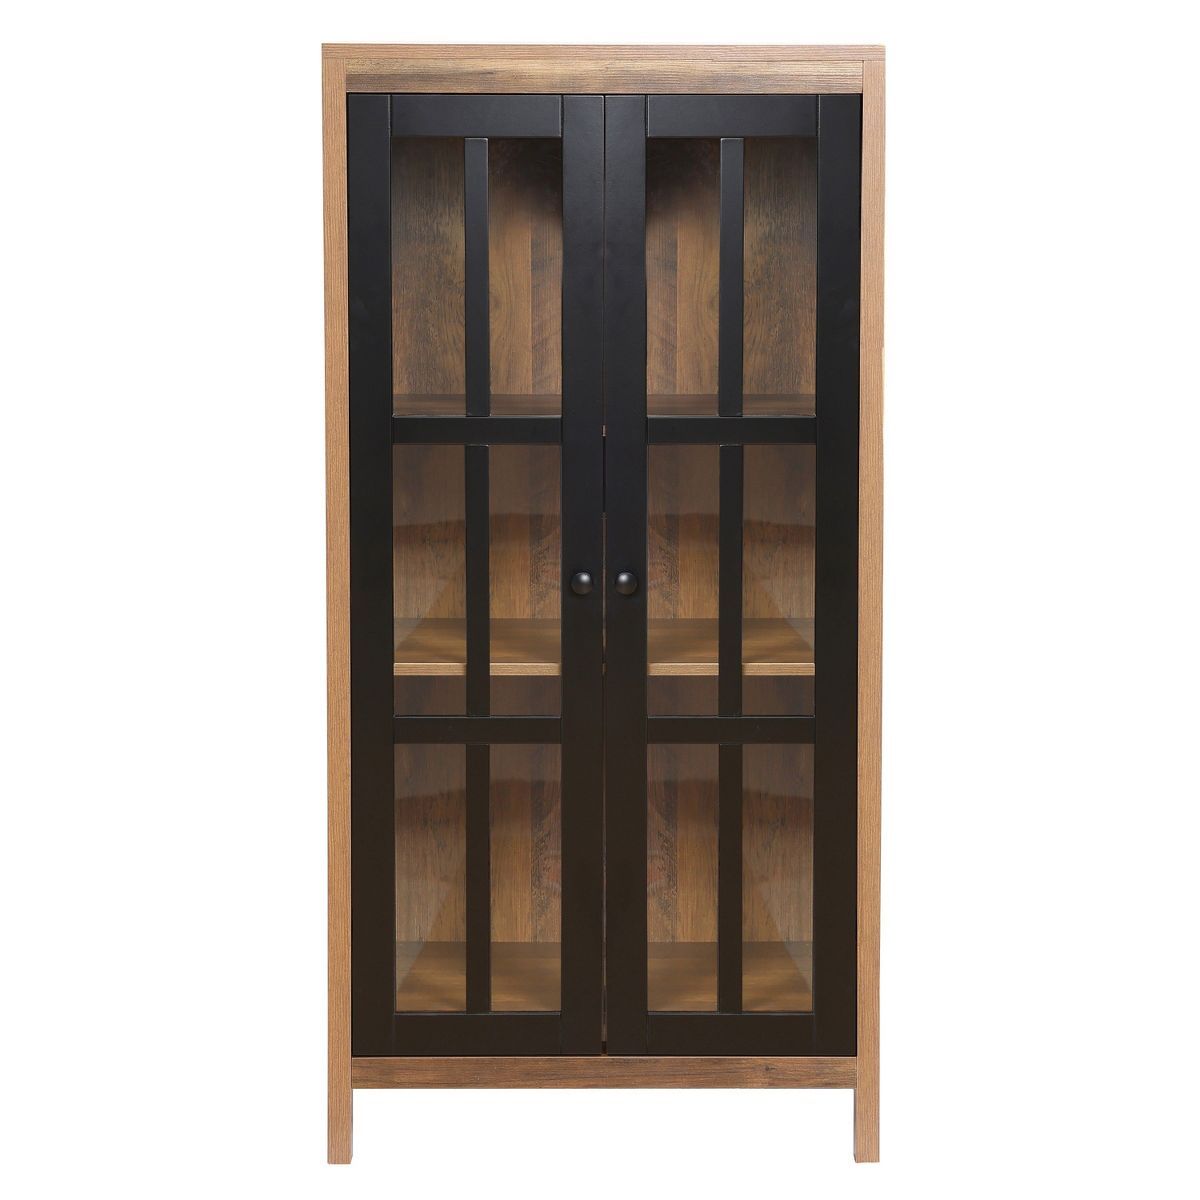 LuxenHome Natural Wood Glass Doors 47.25" H Accent Curio Storage Cabinet. Brown | Target